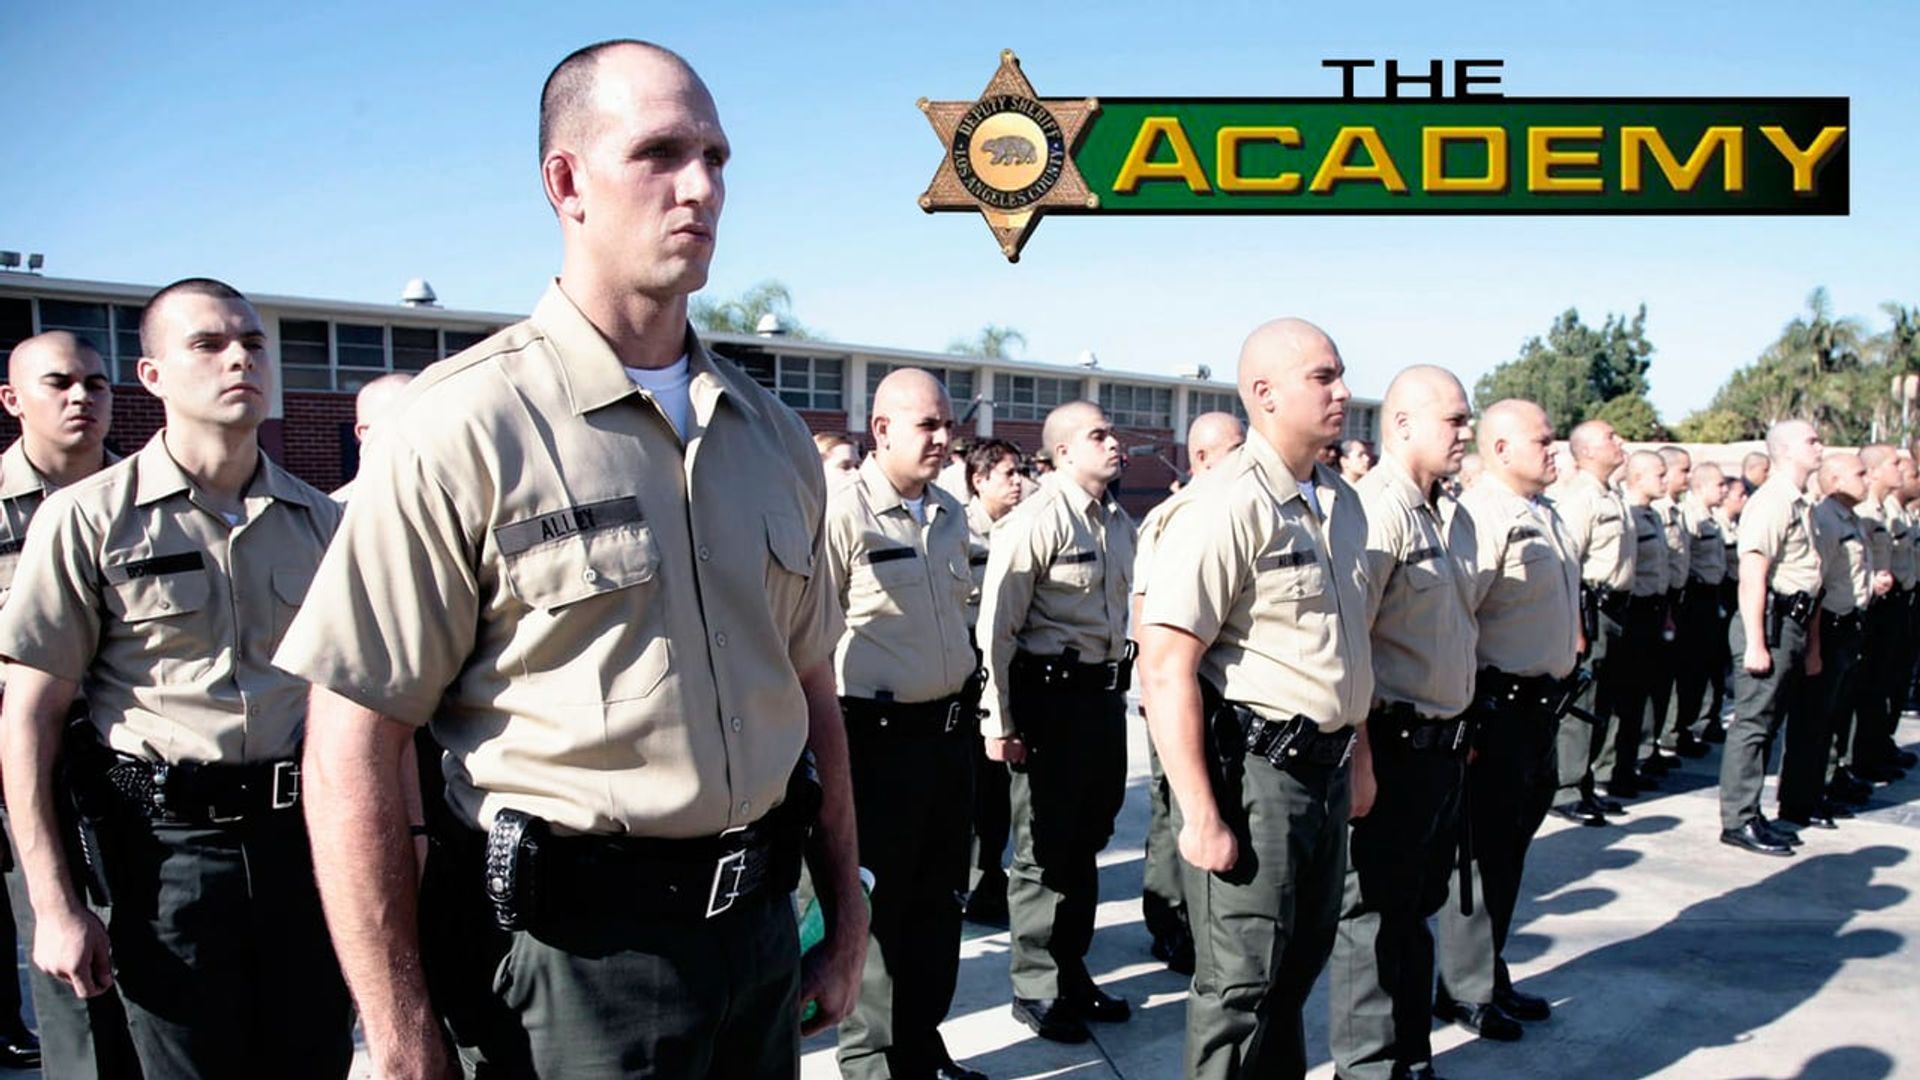 The Academy background